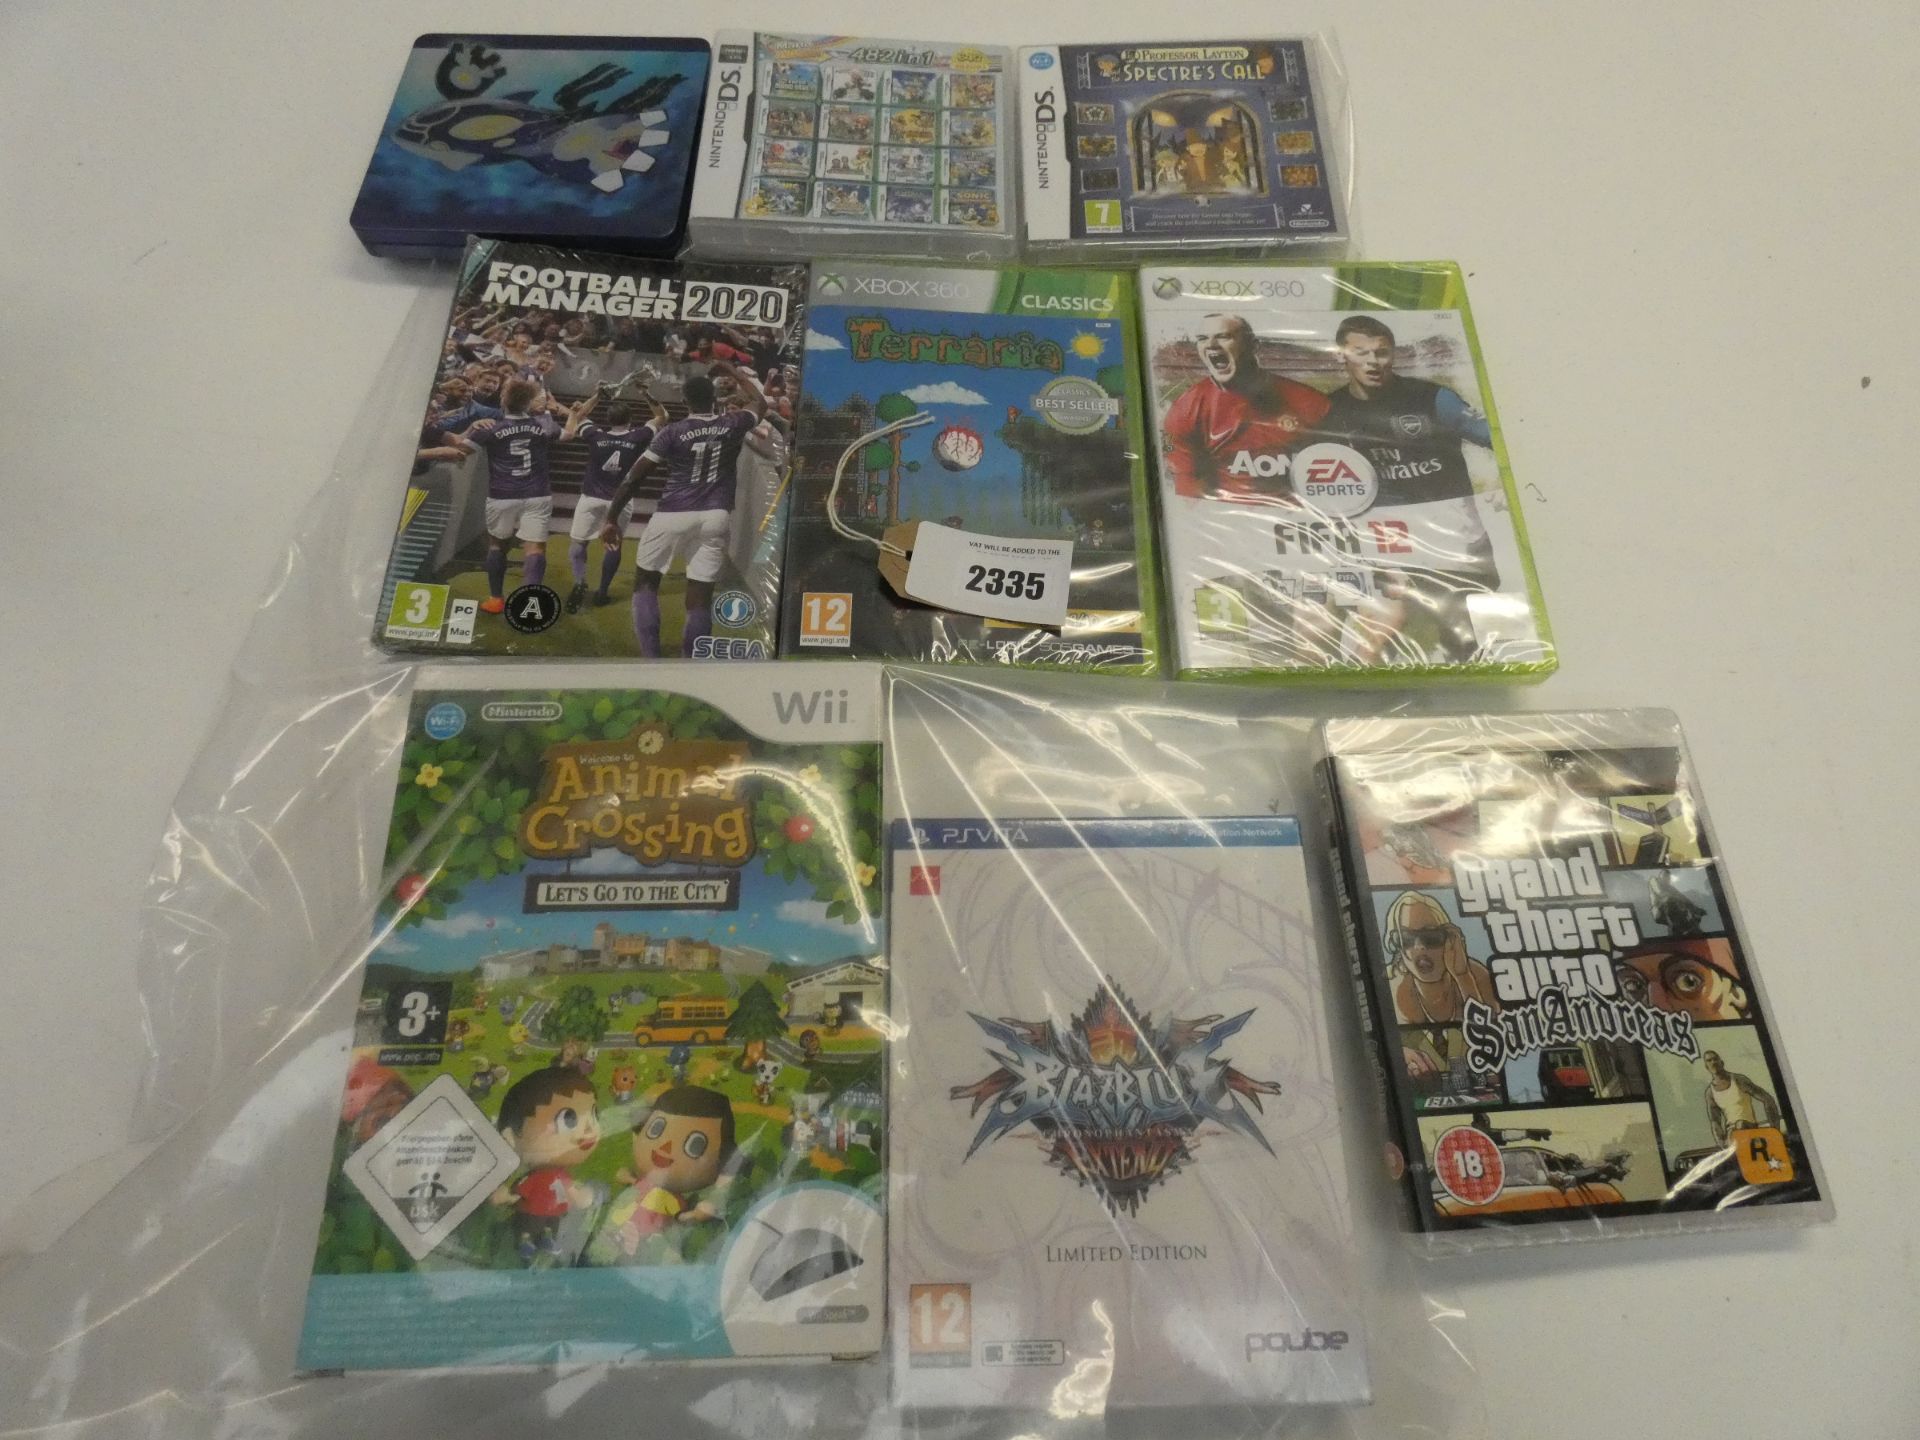 Quantity of games for PS3, PS Vita, Nitendo DS, Wii and Xbox 360 in bag